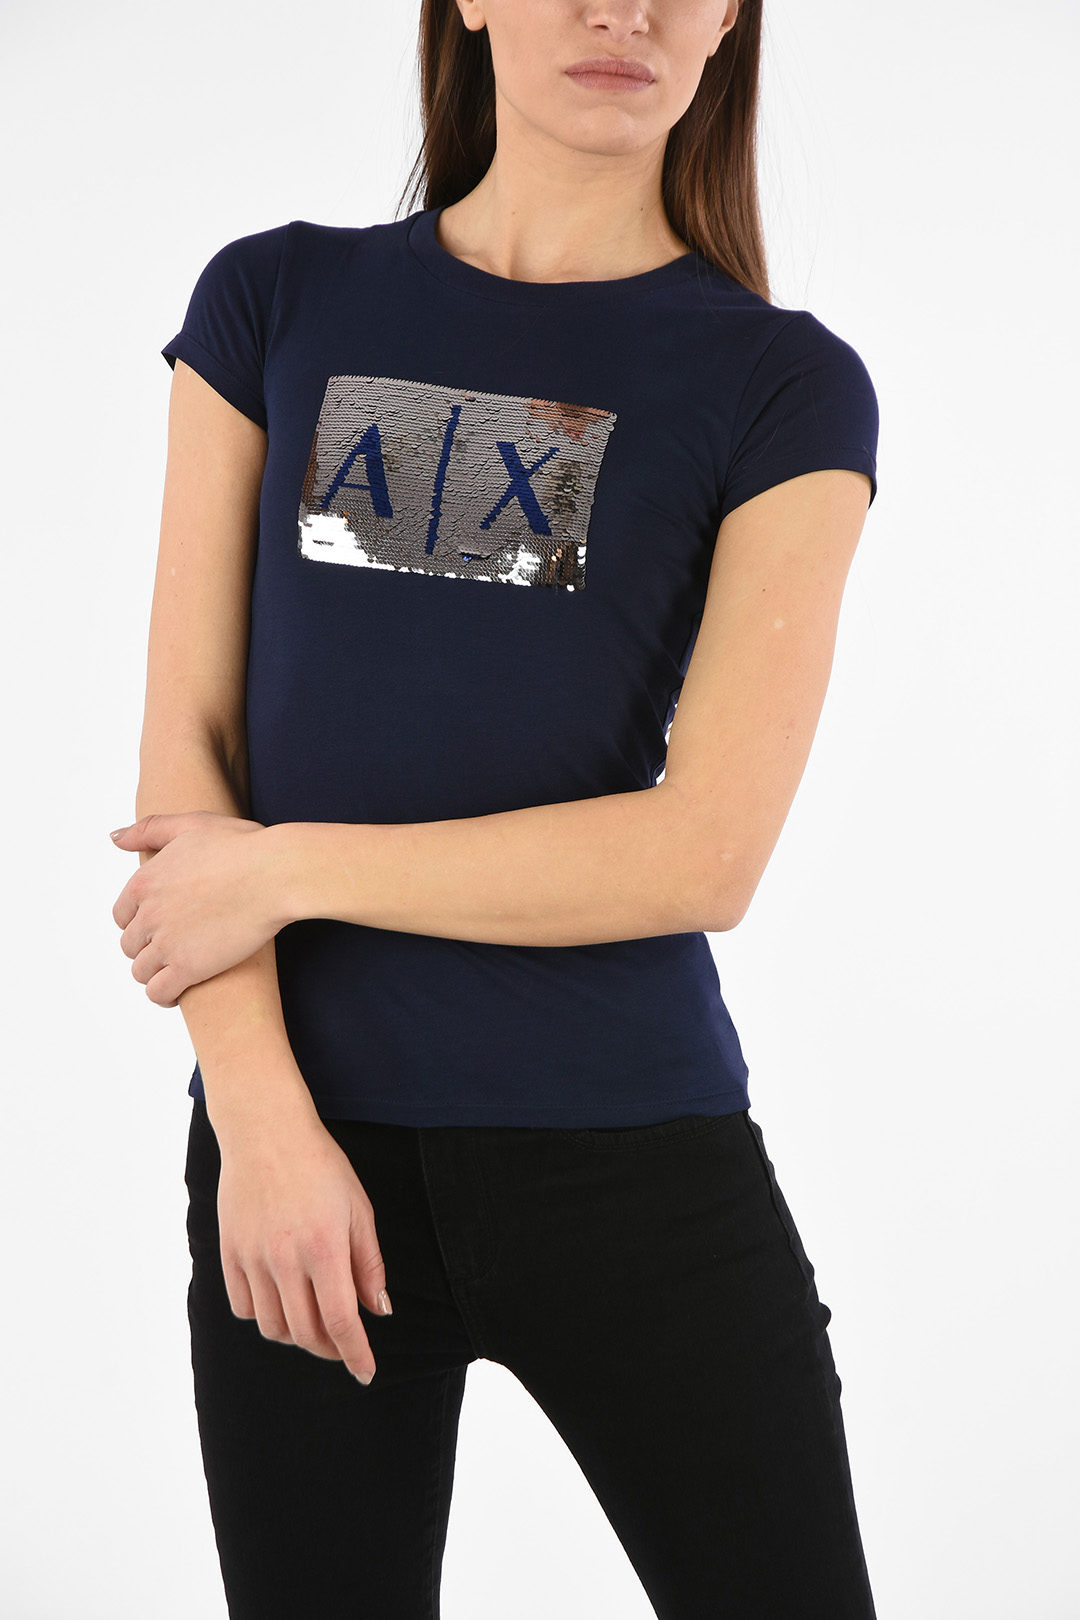 Soak Produktion tricky Armani ARMANI EXCHANGE Sequined T-shirt women - Glamood Outlet